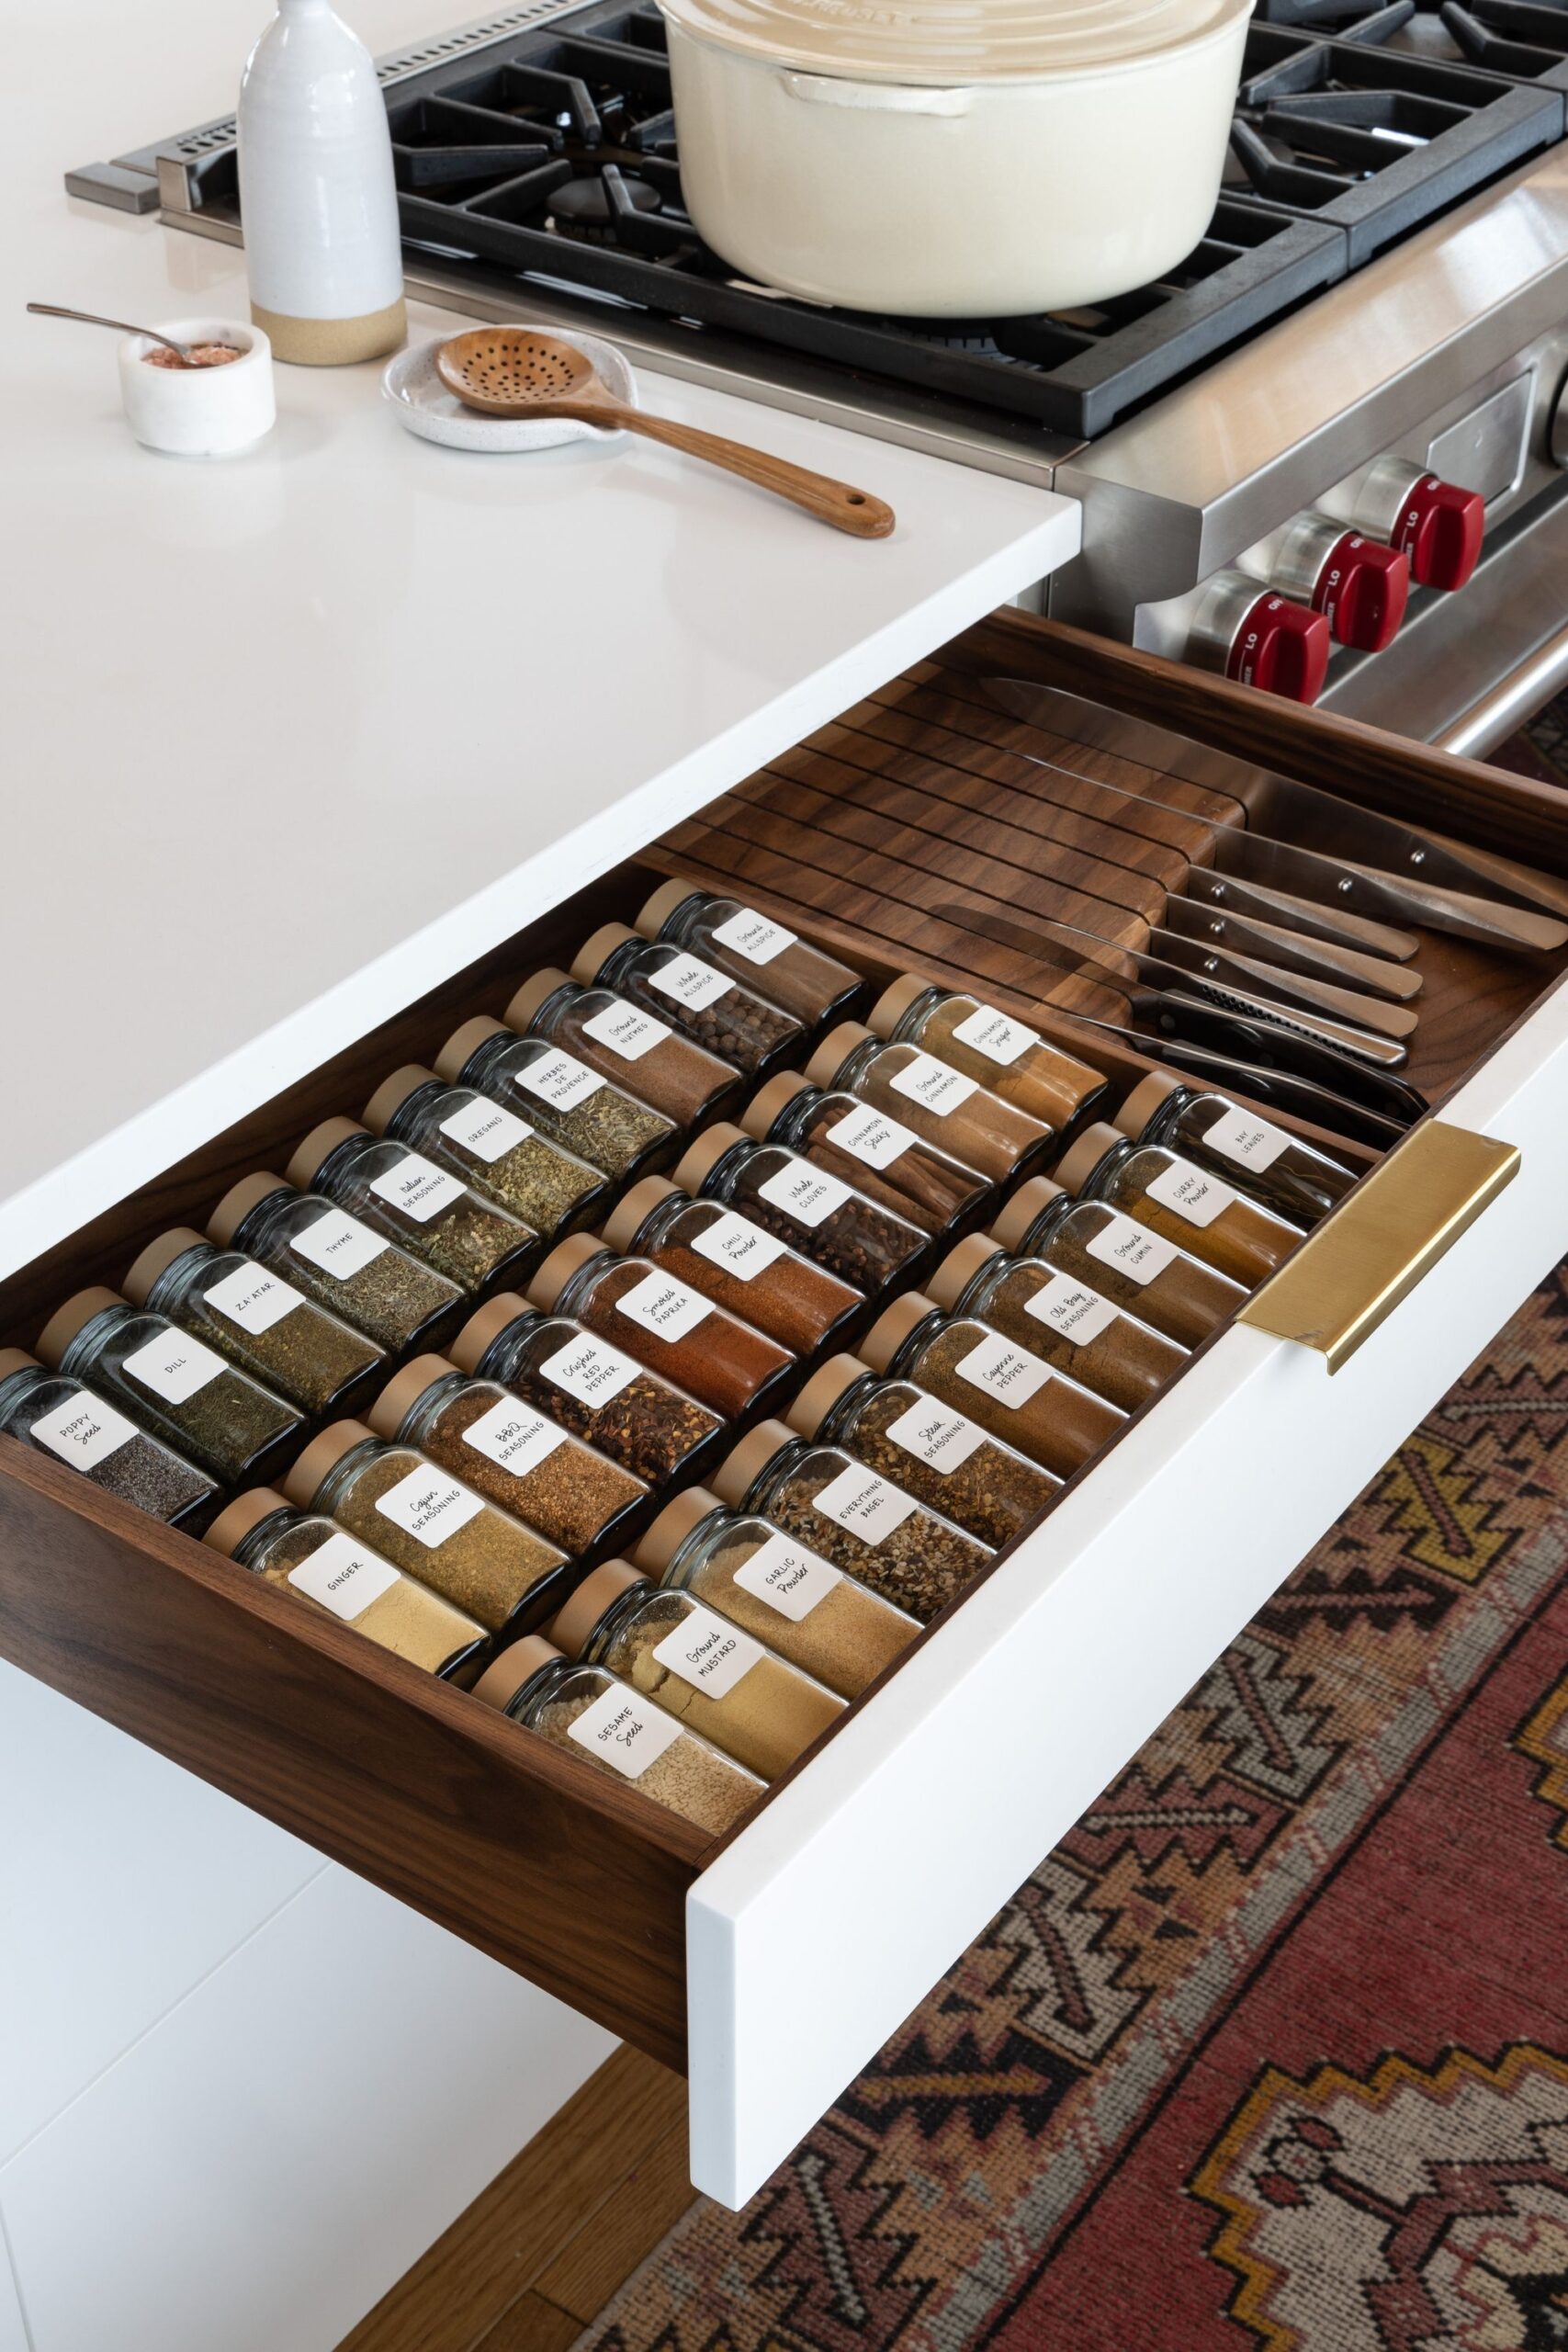 Modern Kitchen Drawers a Breeze for Work and Organization